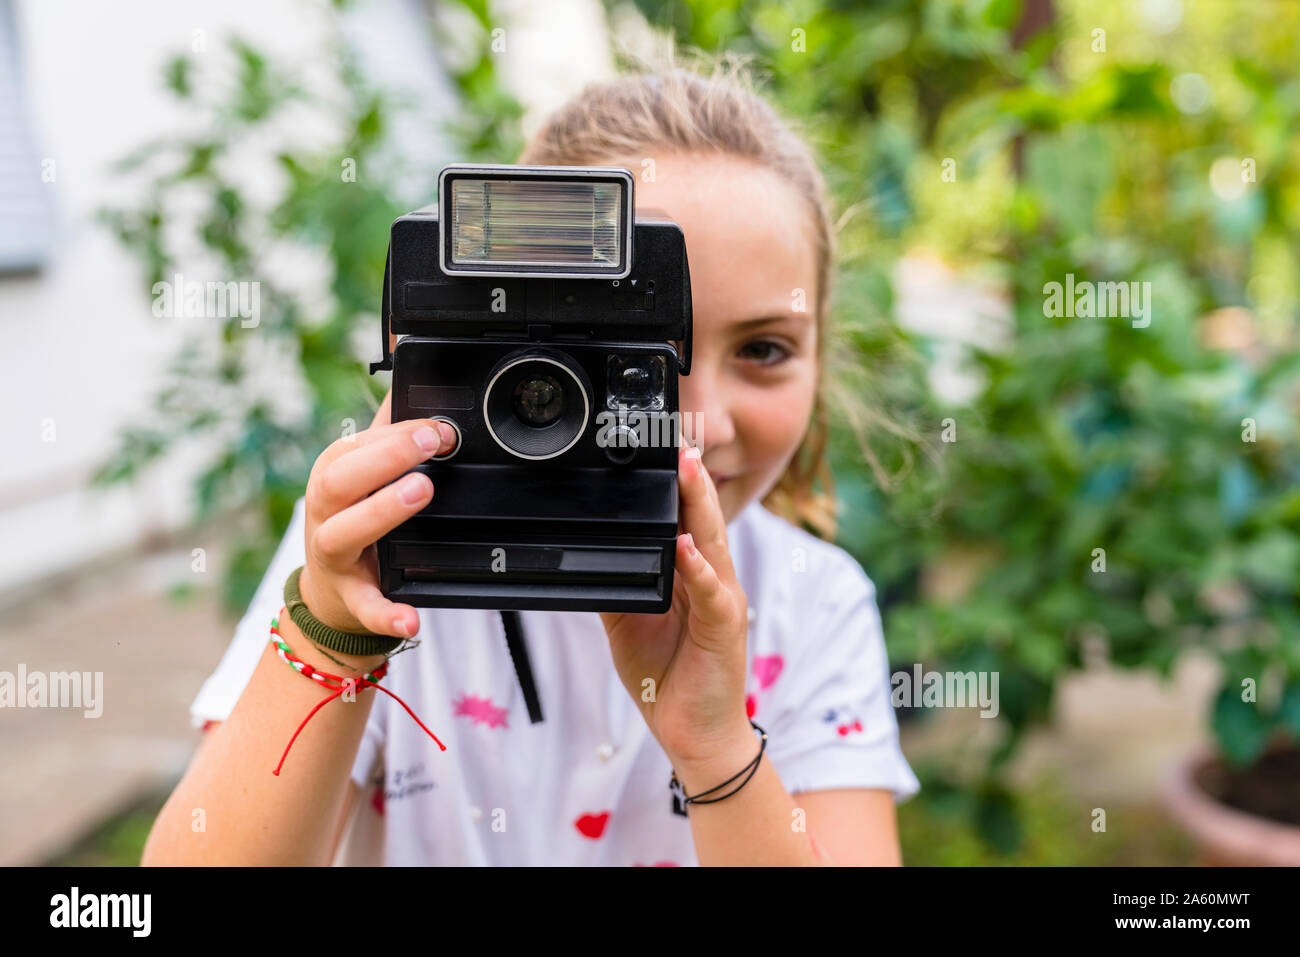 Girl taking a picture with an old-fashioned camera outdoors Stock Photo